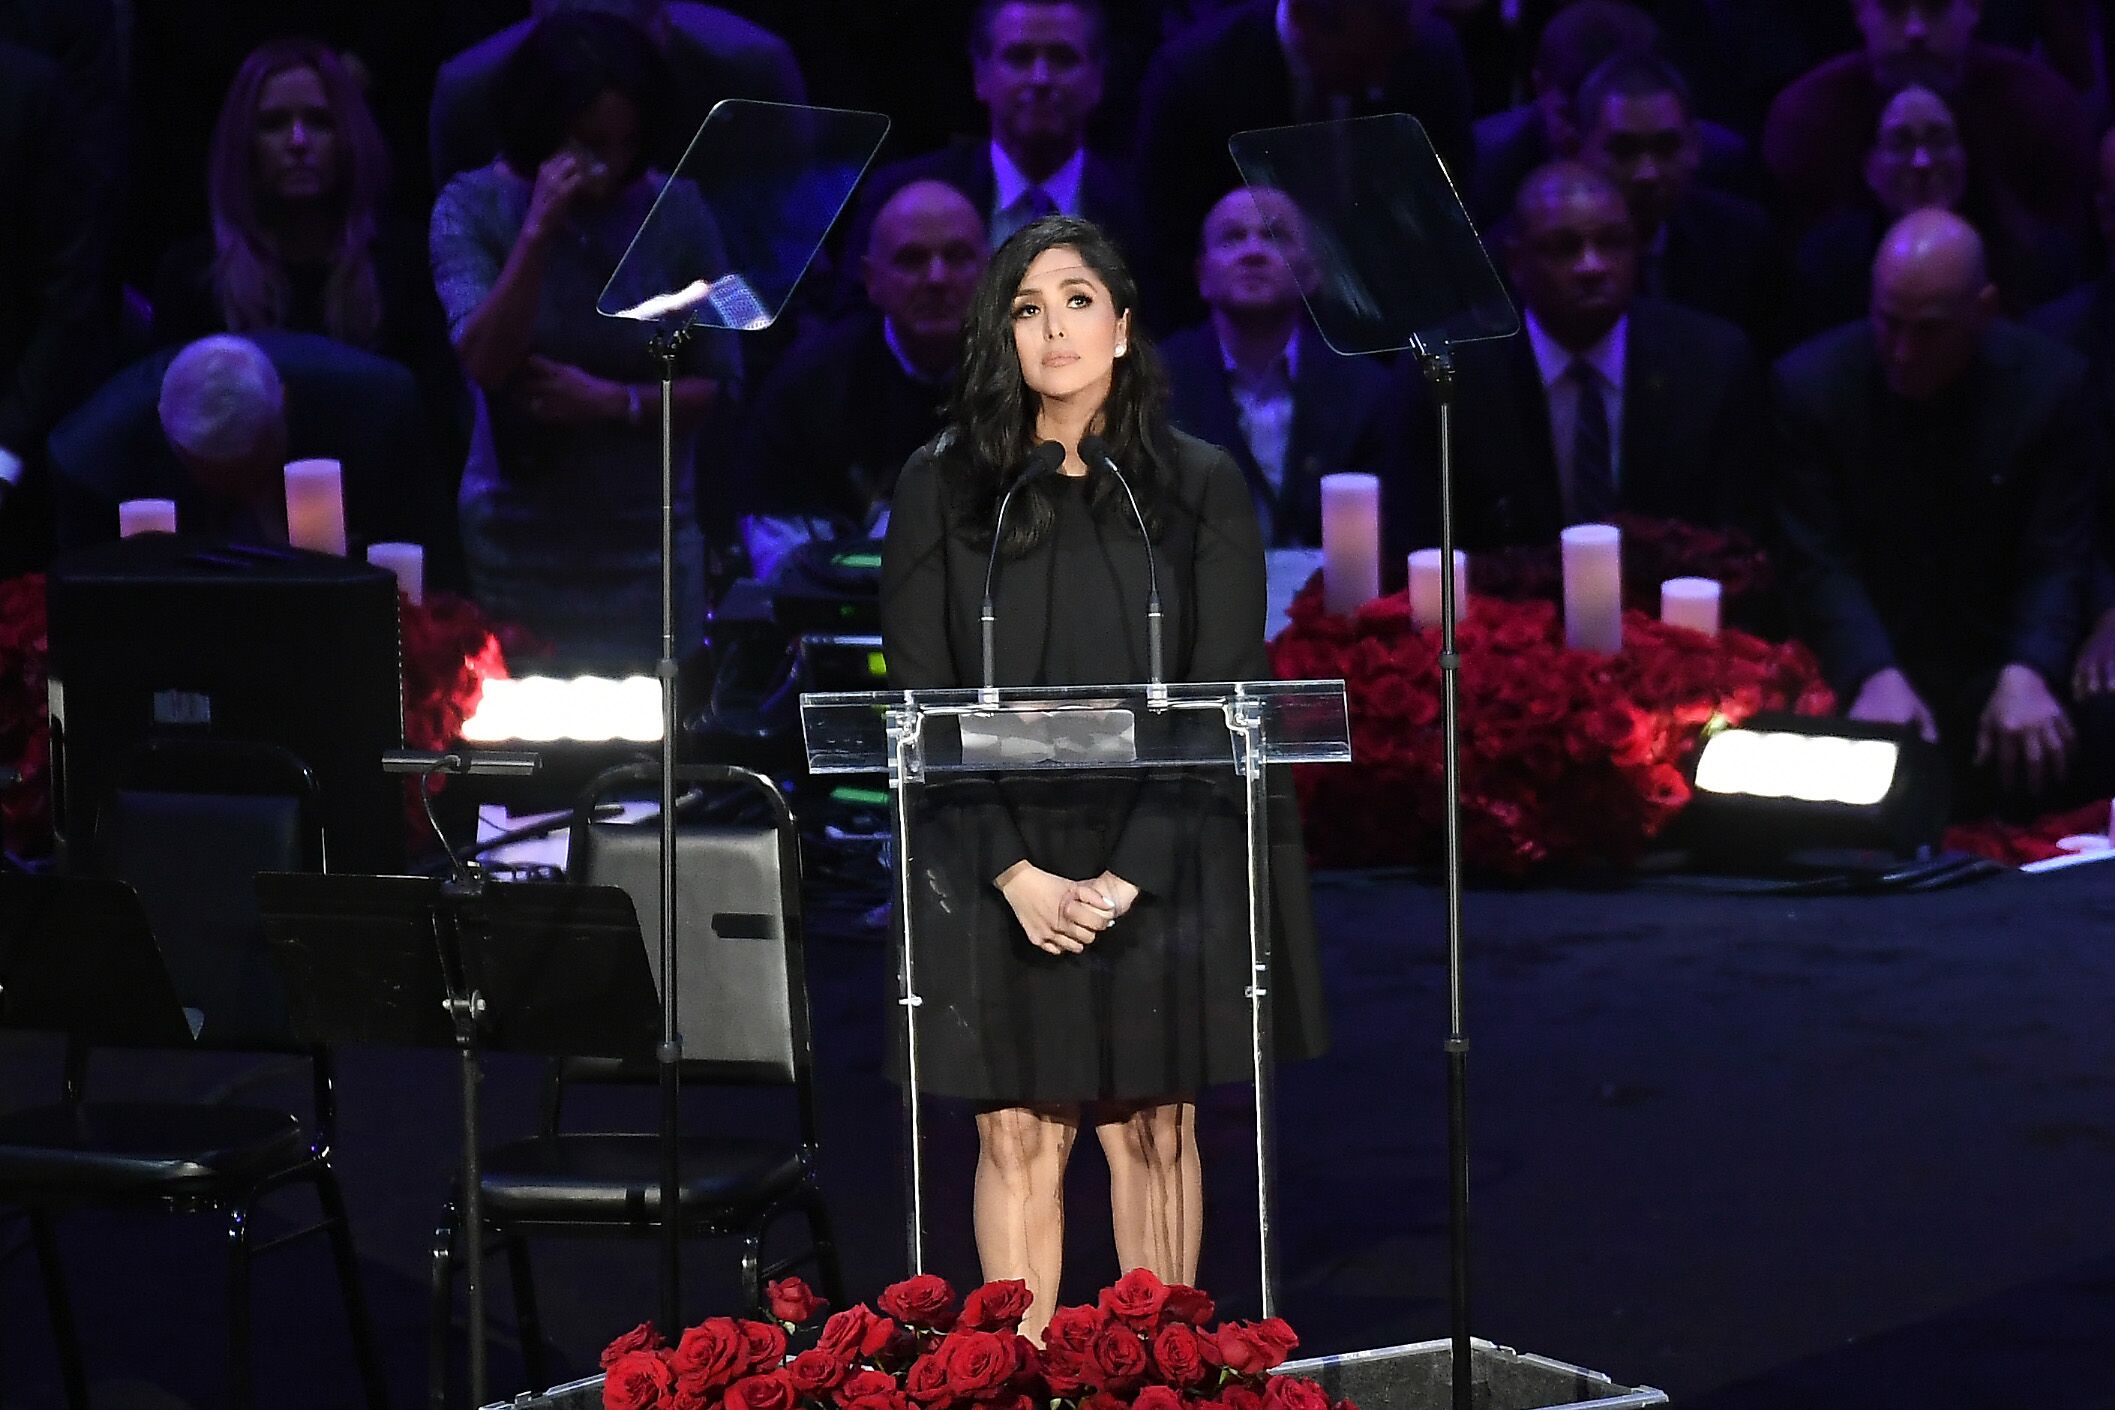 Vanessa Bryant speaks during The Celebration of Life for Kobe & Gianna Bryant at Staples Center on February 24, 2020 in Los Angeles, California | Photo: Getty Images